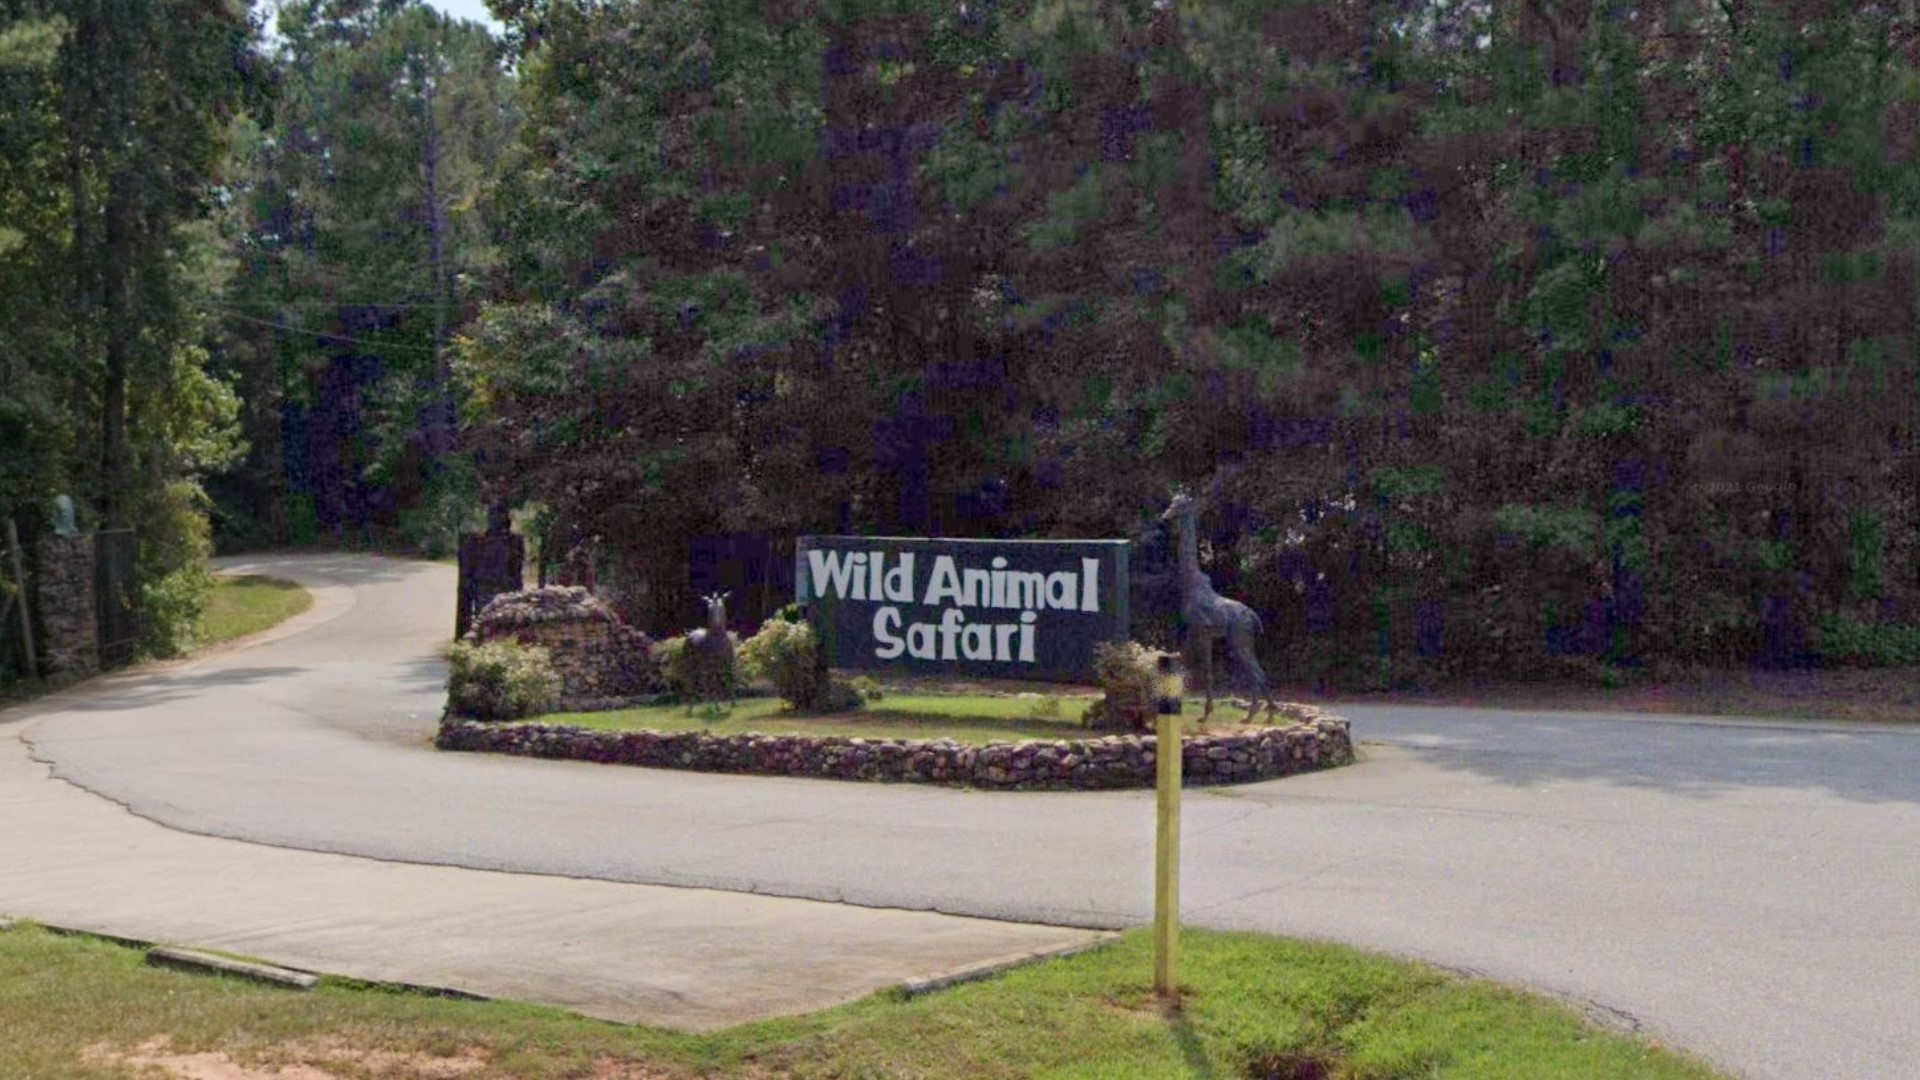 The Troup County Sheriff's Office posted on its social media page that it received a report from the animal safari that two tigers were on the loose.